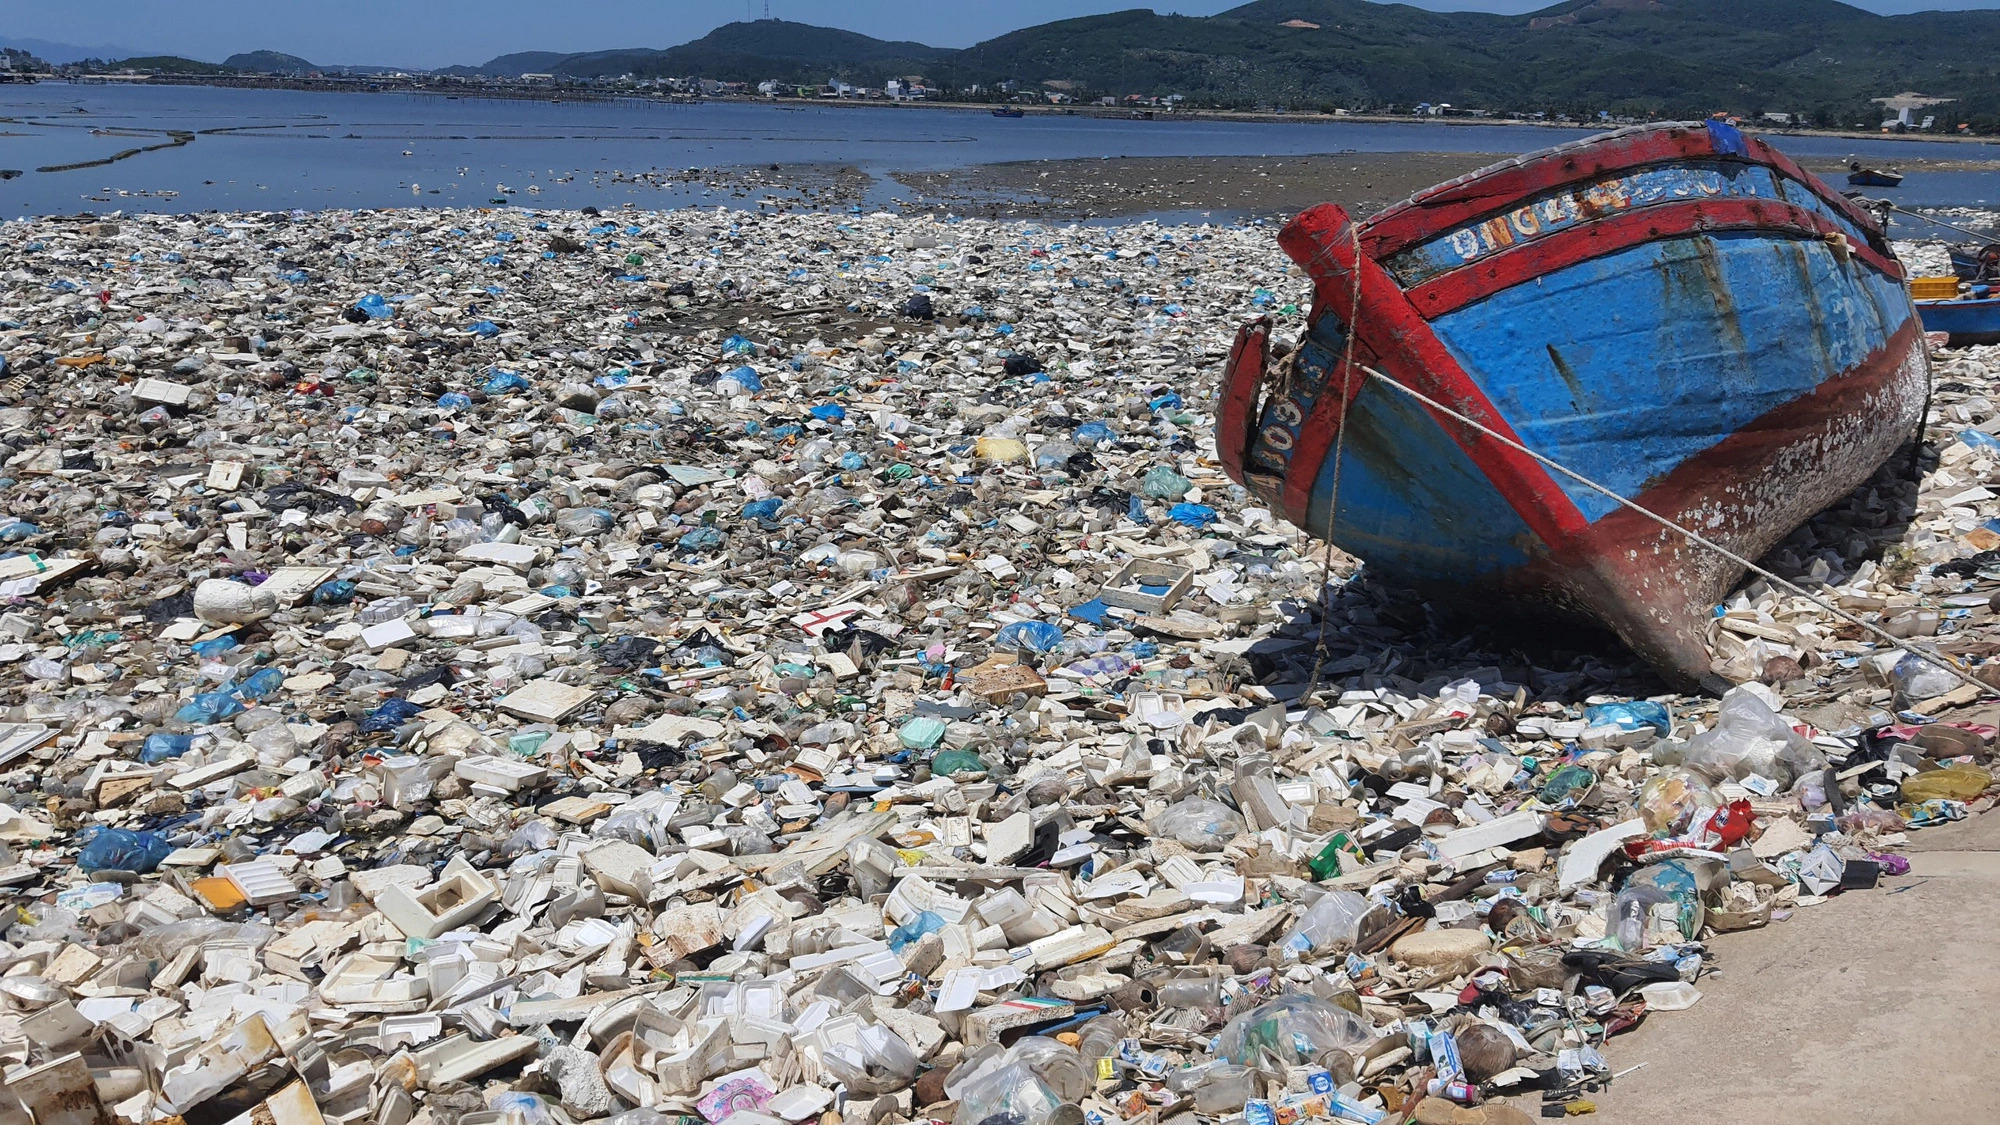 3 solutions suggested for trash-covered lagoon in Vietnam’s Quang Ngai